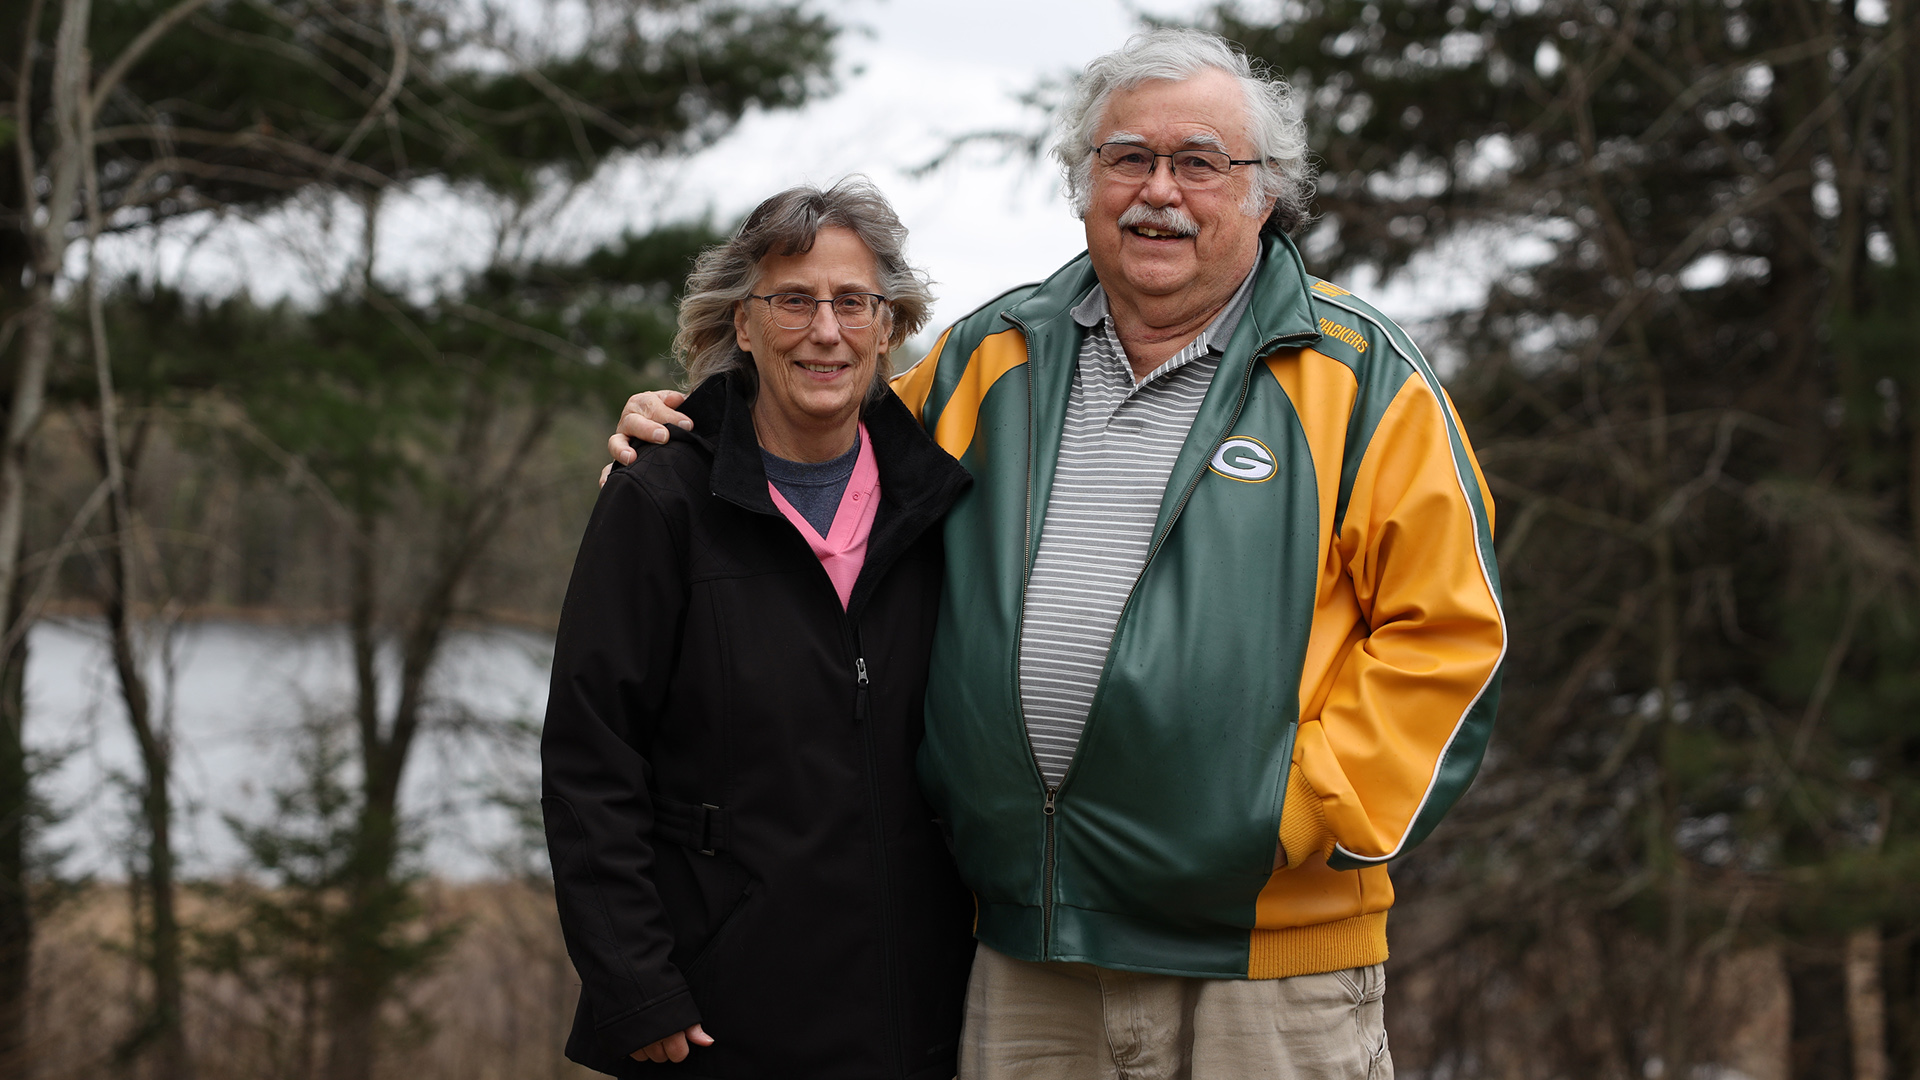 Joanne and Howard Pahl pose for a portrait while standing in front of trees and a body of water.